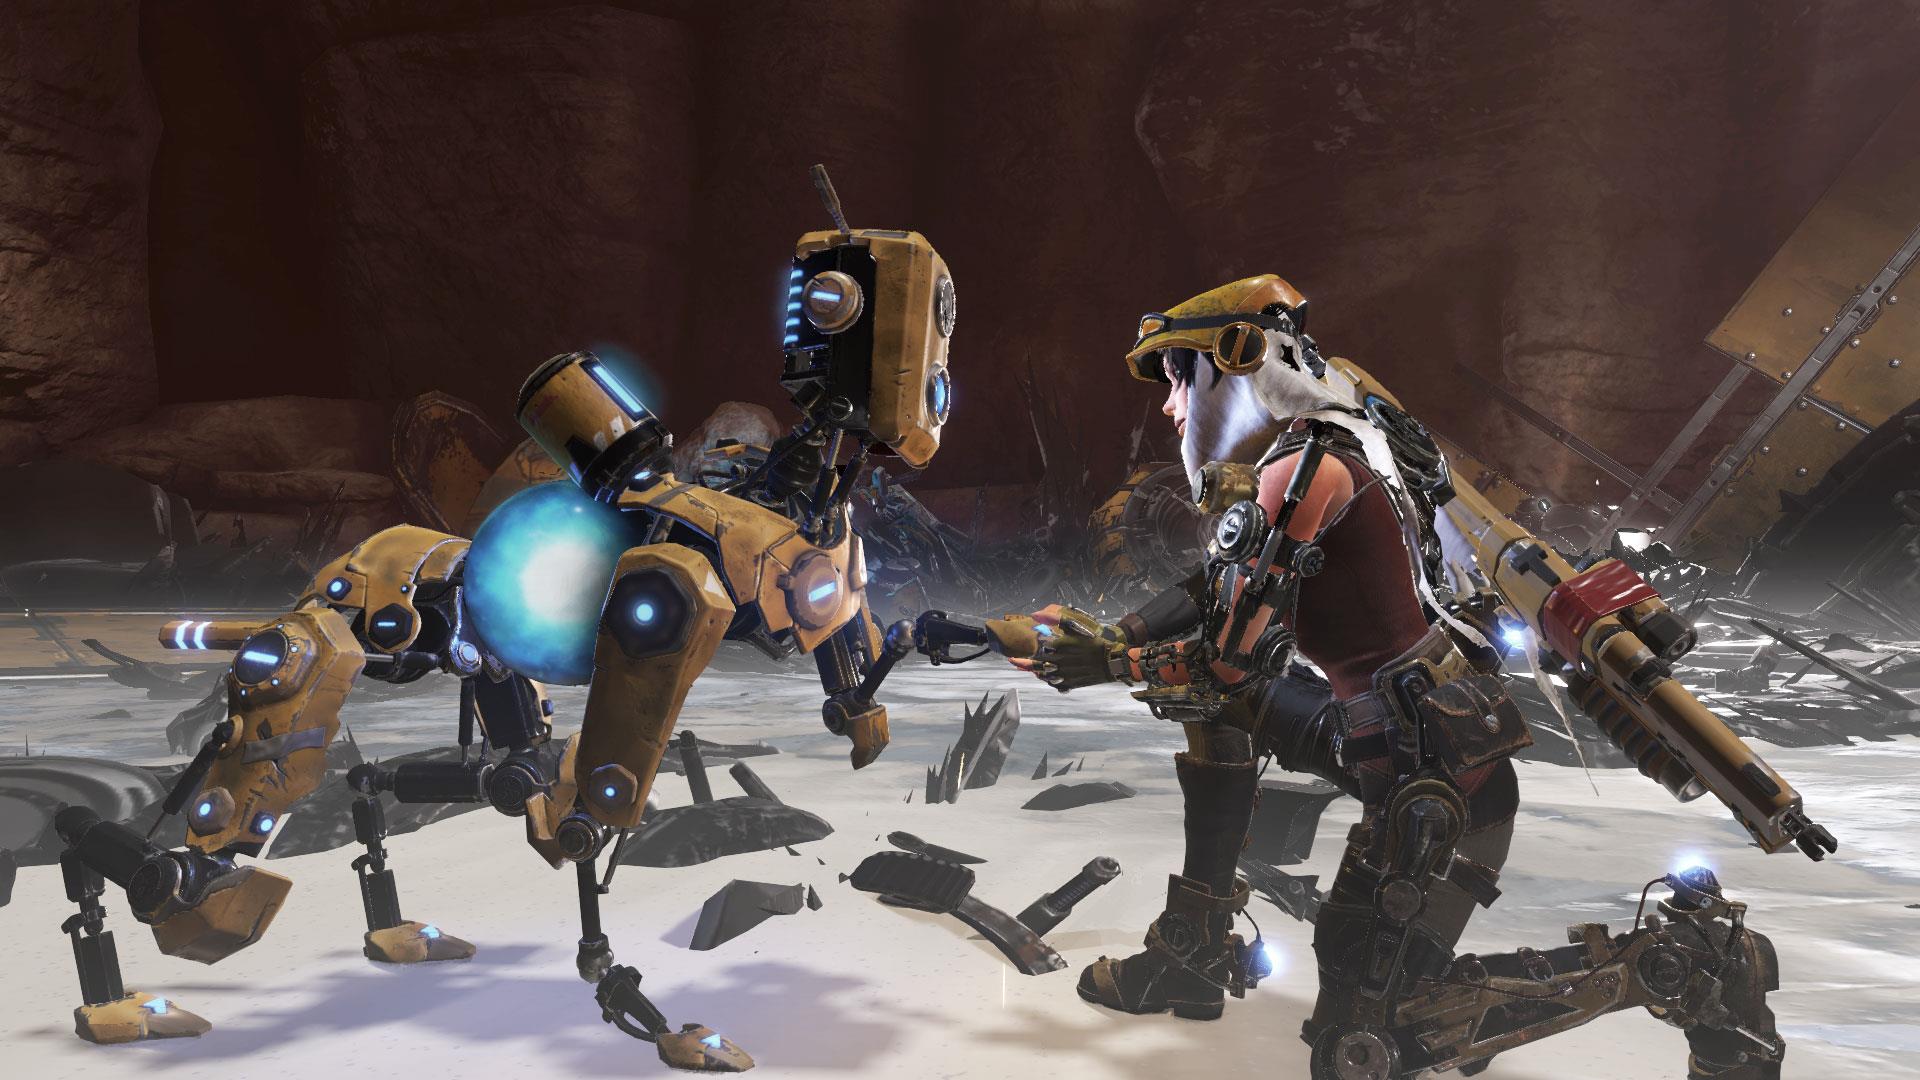 Image for ReCore is out soon so give the launch trailer a watch